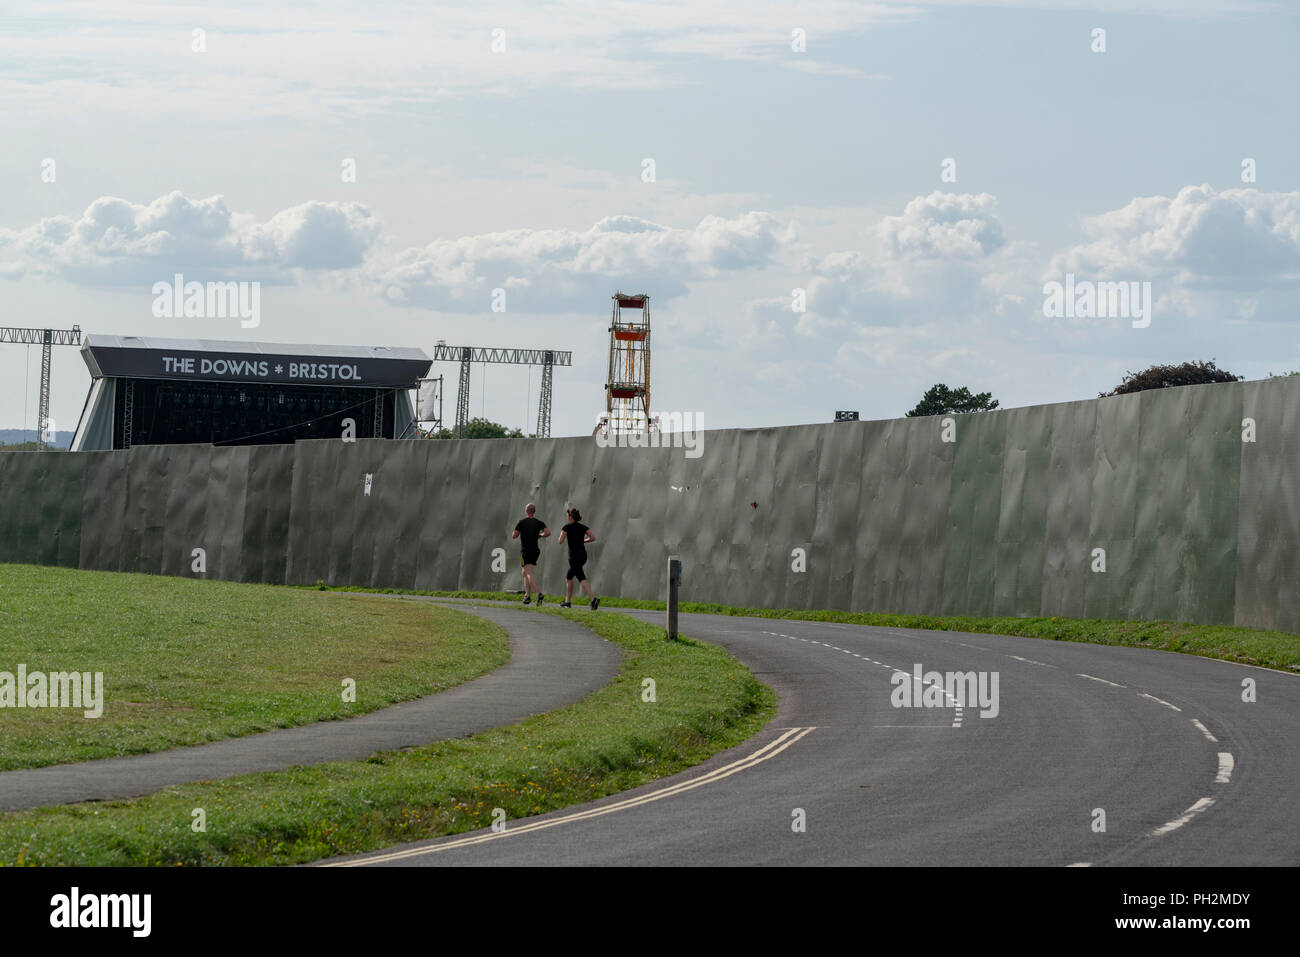 Bristol, United Kingdom, 30 August, 2018: Runners check out preparations for The Downs, Bristol concert as they pass by the security barrier erected around the site for the event.  The open air concert, a key fixture in the Bristol summer calendar, is to be staged on 1 September, 2018.  The event features music from Noel Gallagher's High Flying Birds and Paul Weller amongst a packed line-up.  Credit: mfimage/Alamy Live News Stock Photo